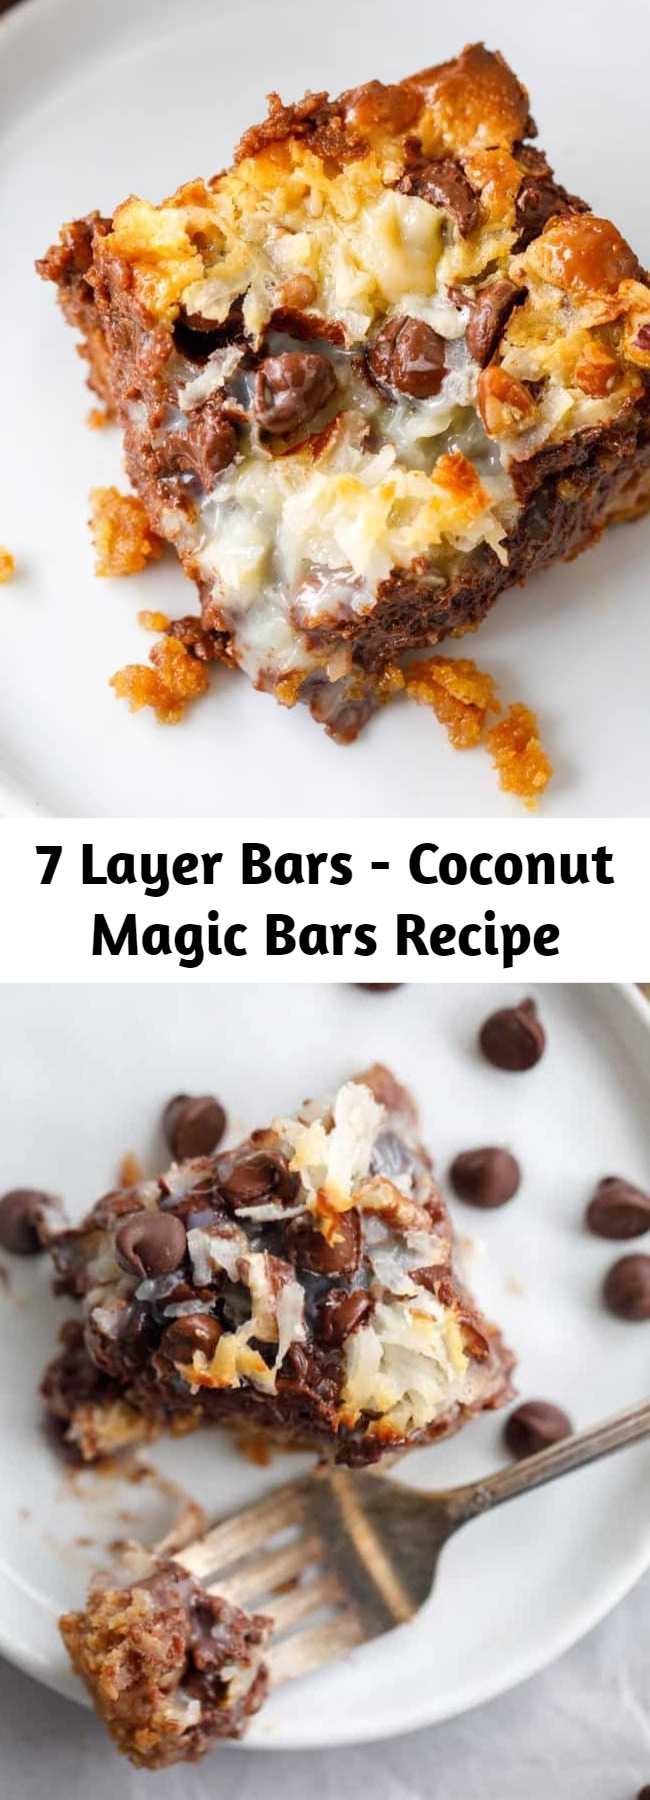 7 Layer Bars - Coconut Magic Bars Recipe - These coconut magic bars are so easy to make that it’s almost funny. It doesn’t seem like something so TASTY could result from layering a few ingredients in a baking dish. Y’all, these coconut magic bars are like HEAVEN. These ooey-gooey coconut magic cookie bars are my favorite dessert EVER! #Dessert #Coconut #Bars